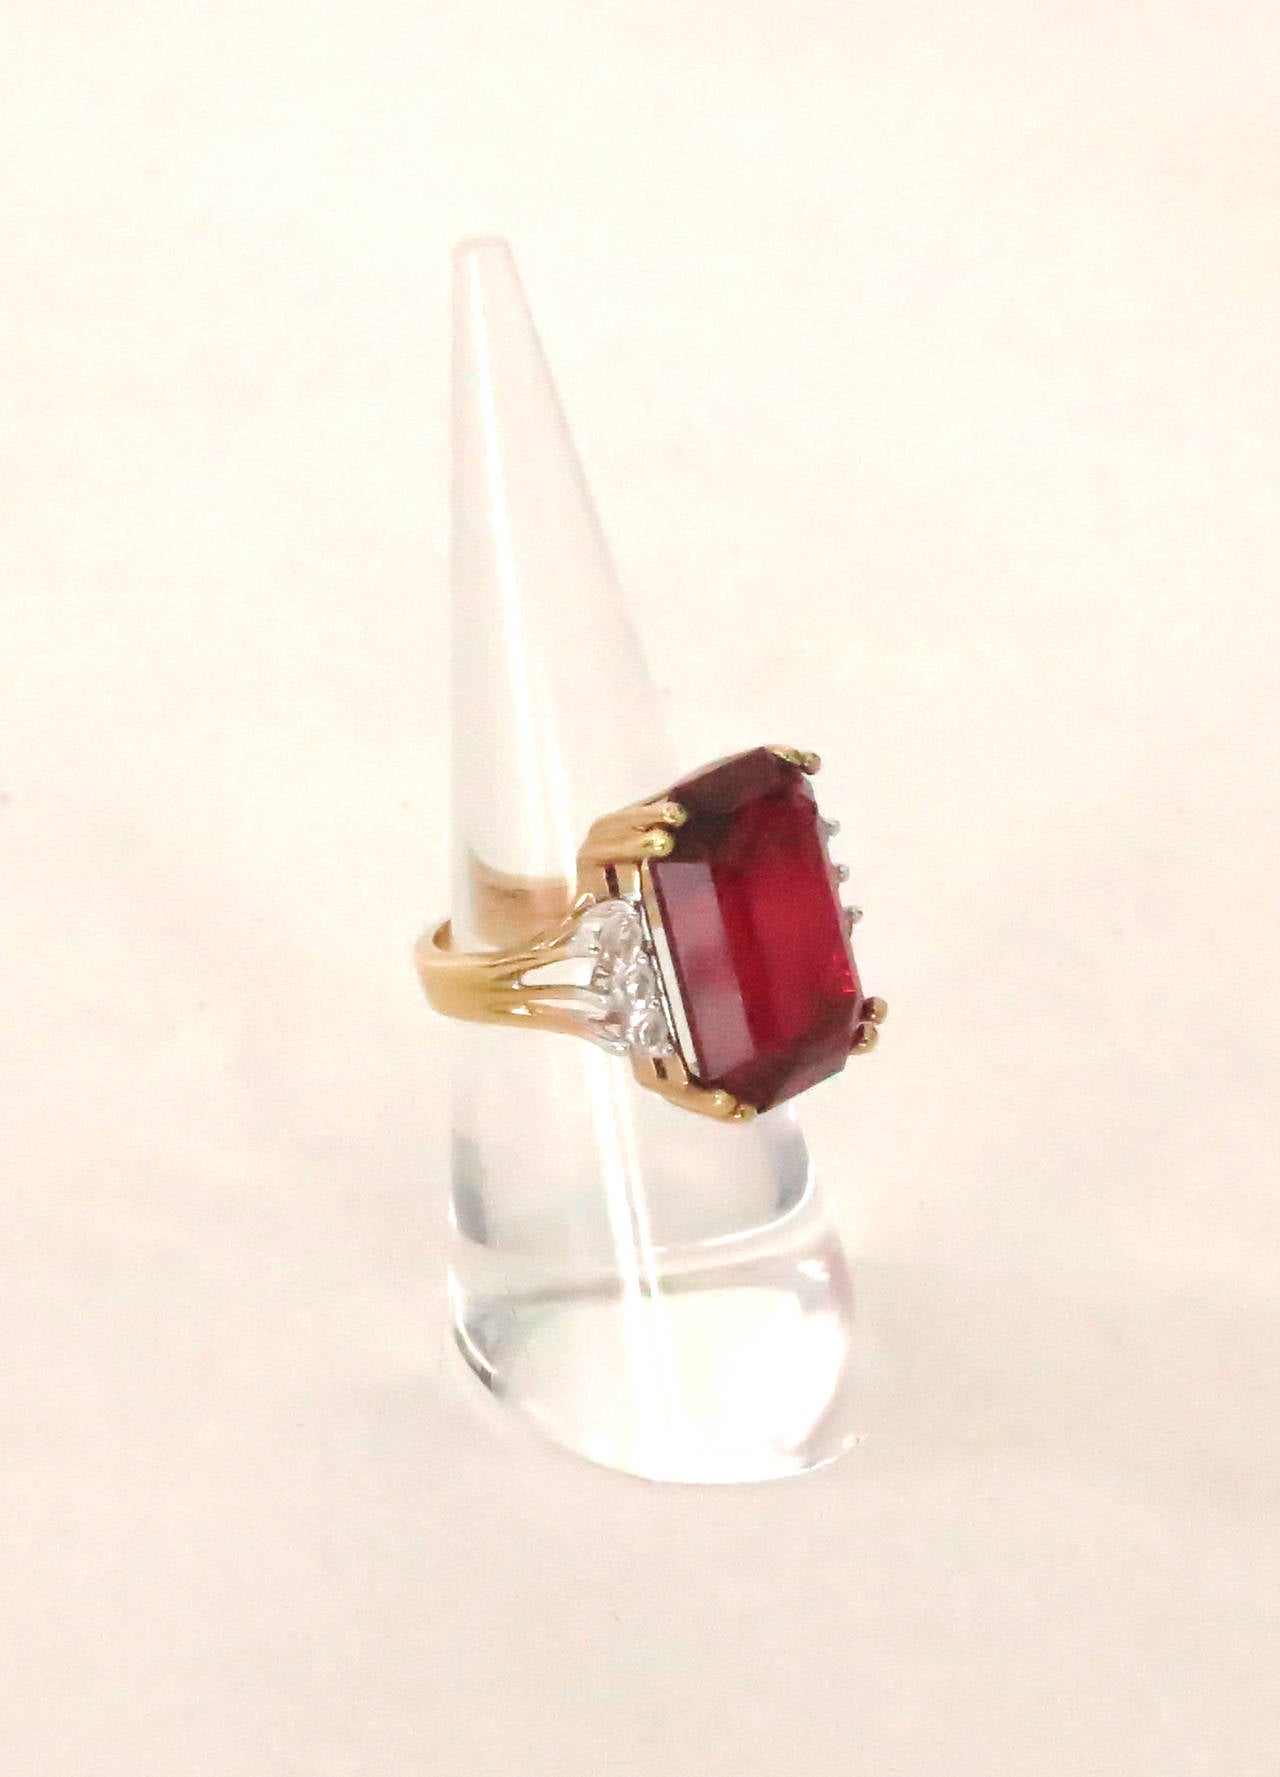 Faux emerald cut ruby & diamond ring set in gold...A large & beautiful faux ruby is prong set with three sparkling faux diamonds at either side...Barely worn and in excellent condition without scratches or chips...Fits a size 5.